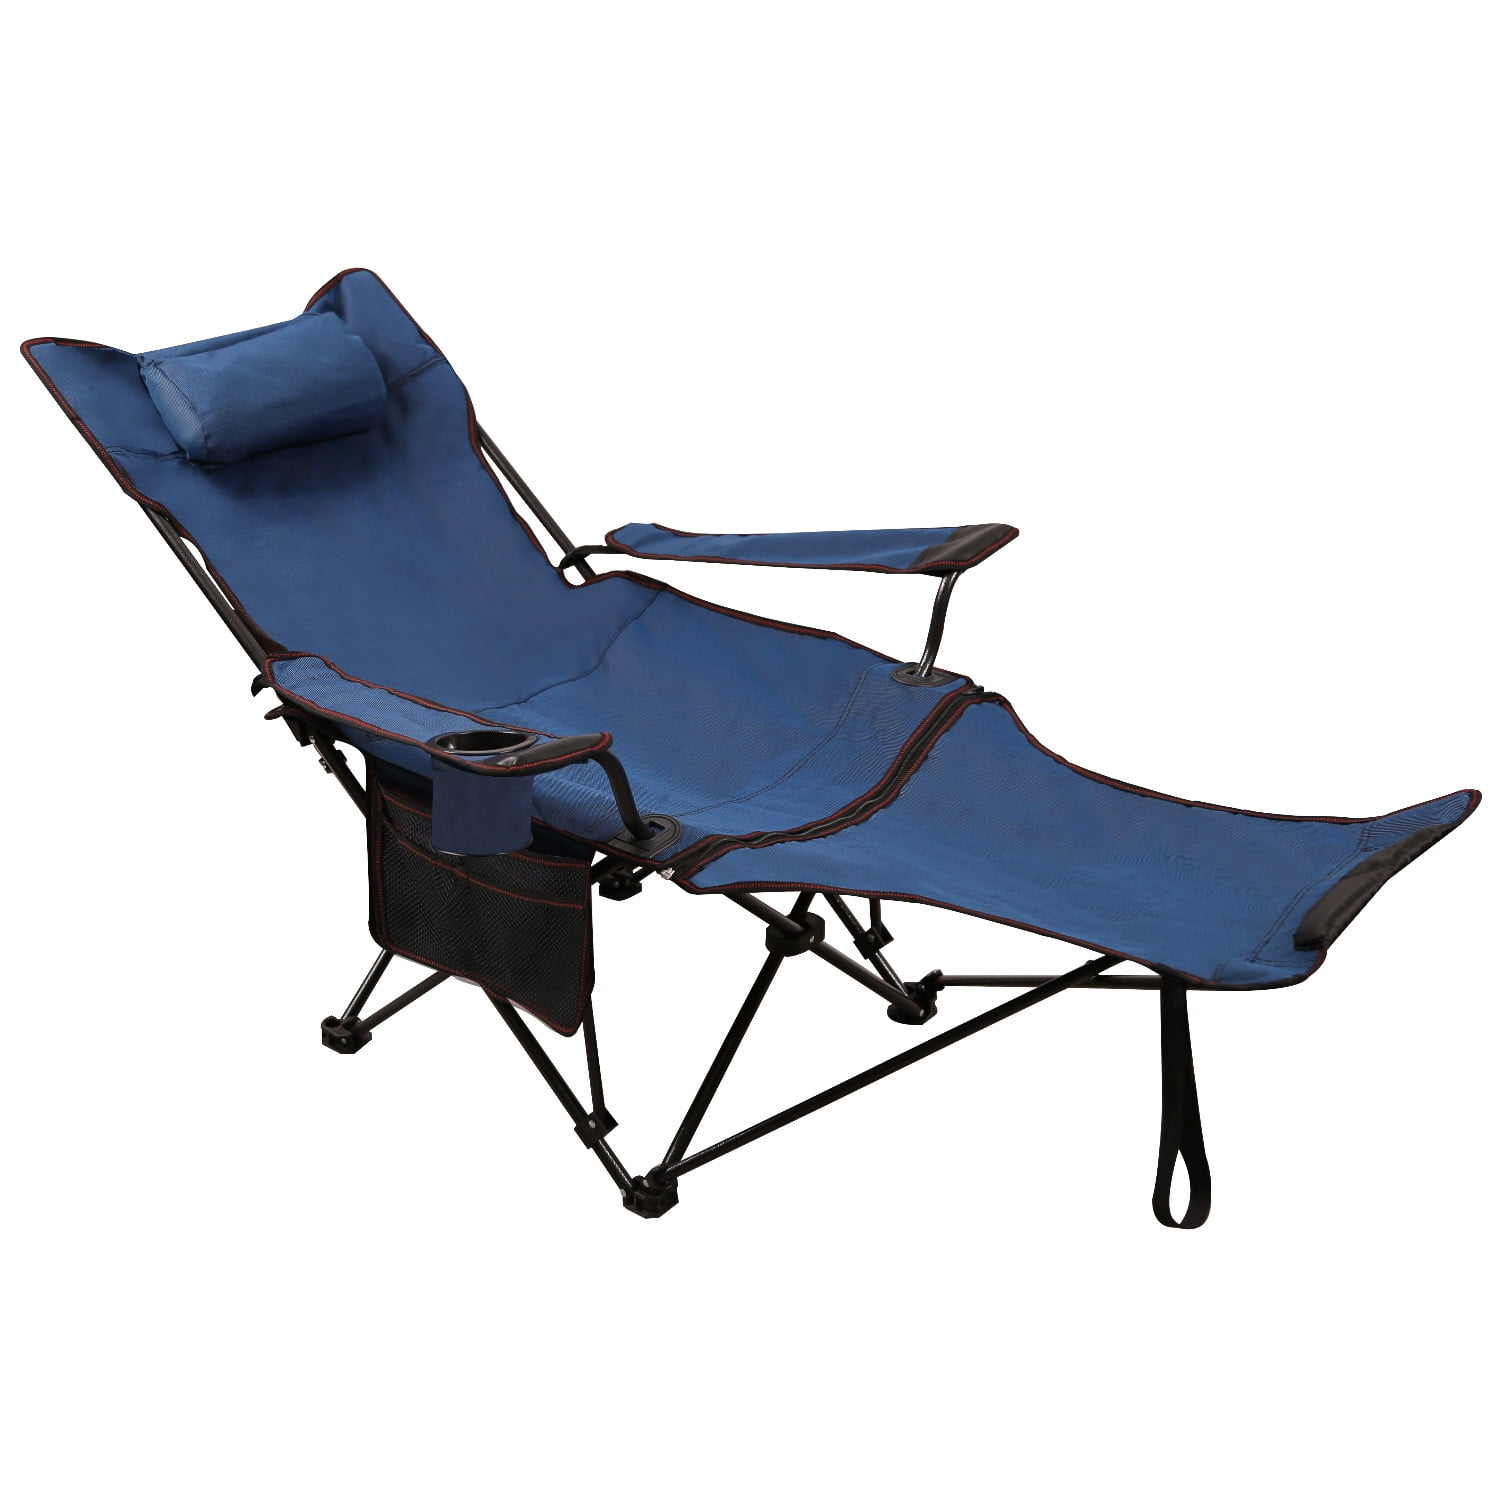 REDCAMP Folding Camping Chair with Footrest,Reclining